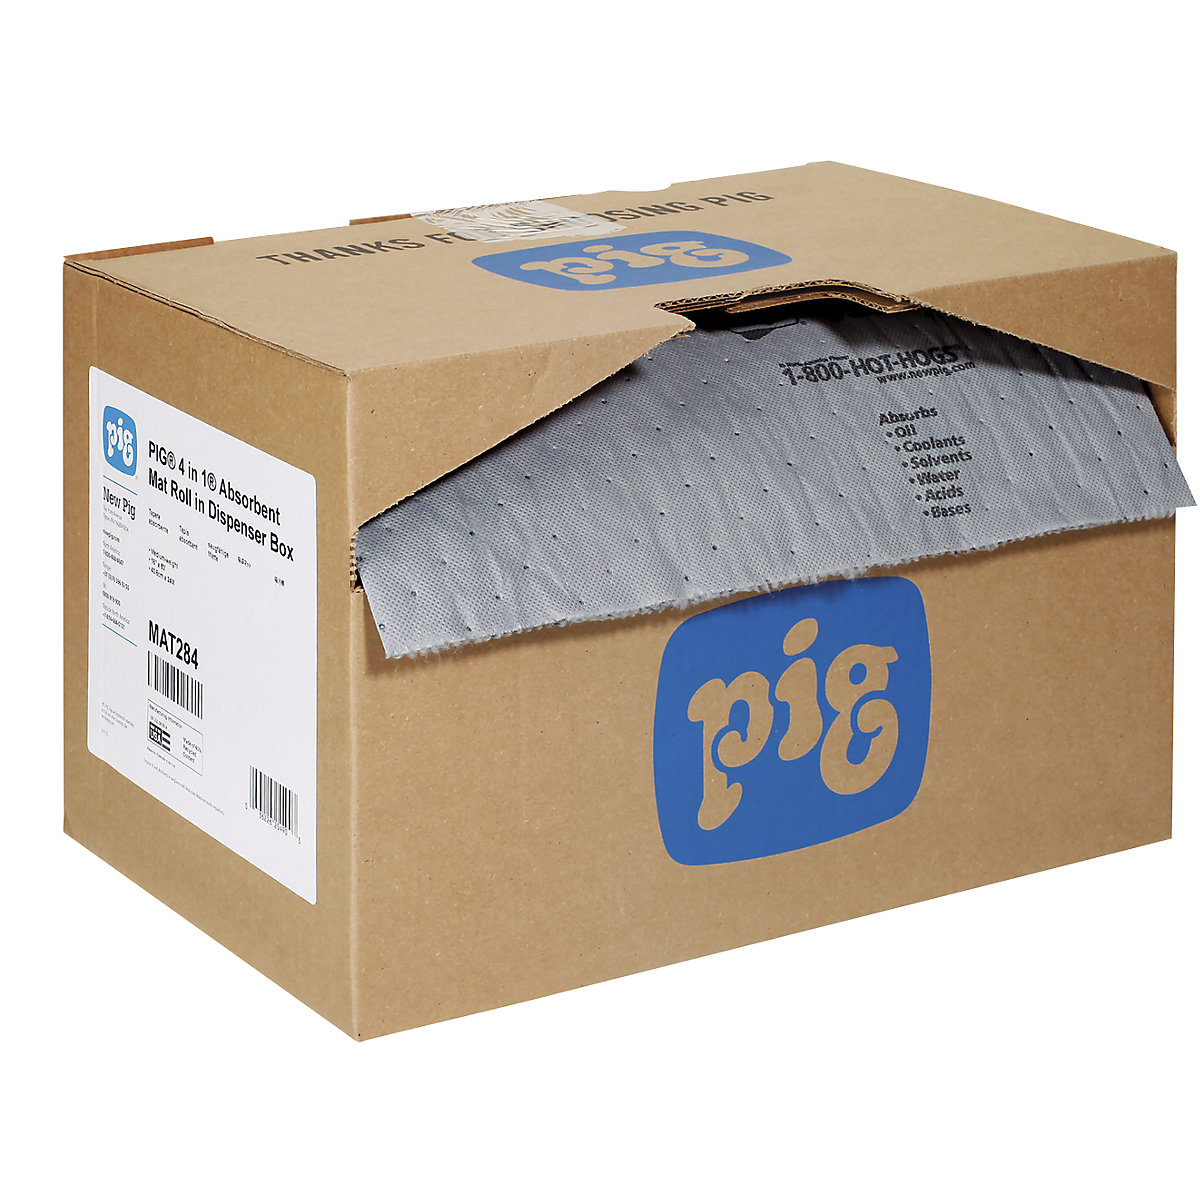 Rolo absorvente universal 4-in-1® – PIG